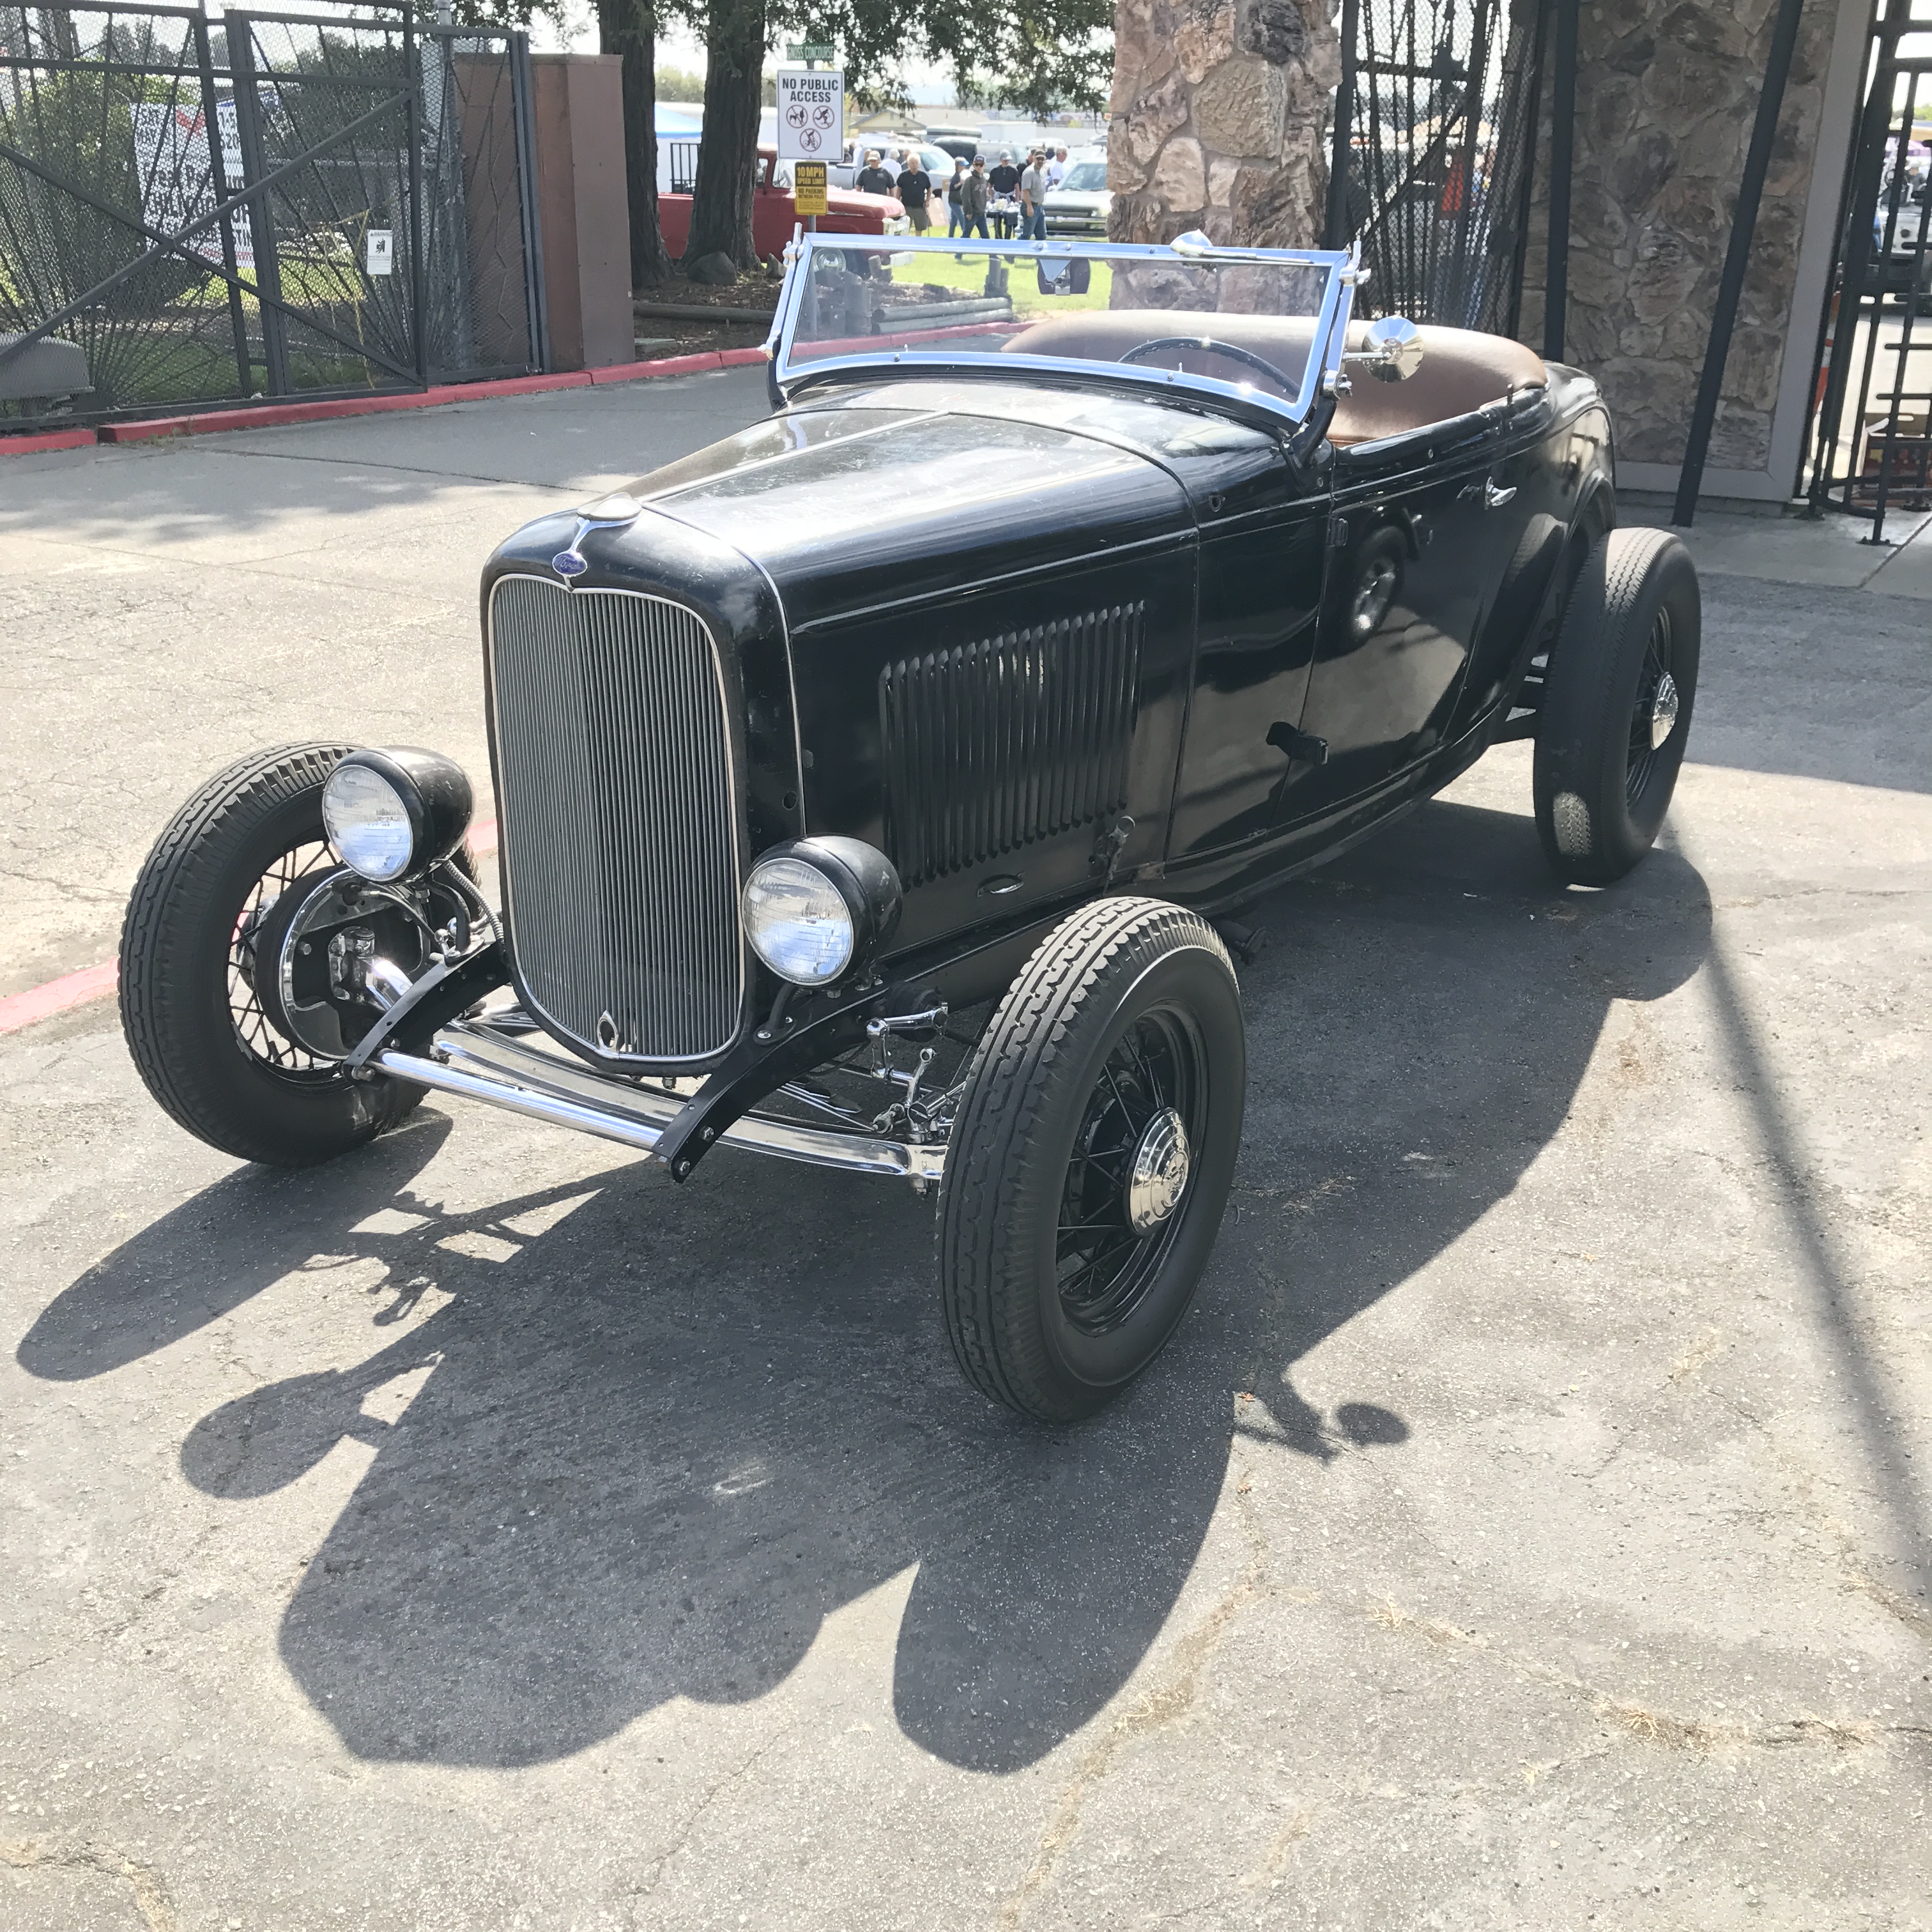 1932 Ford Deuce Hot Rod Roadster - roadster with an authentic '40s vibe